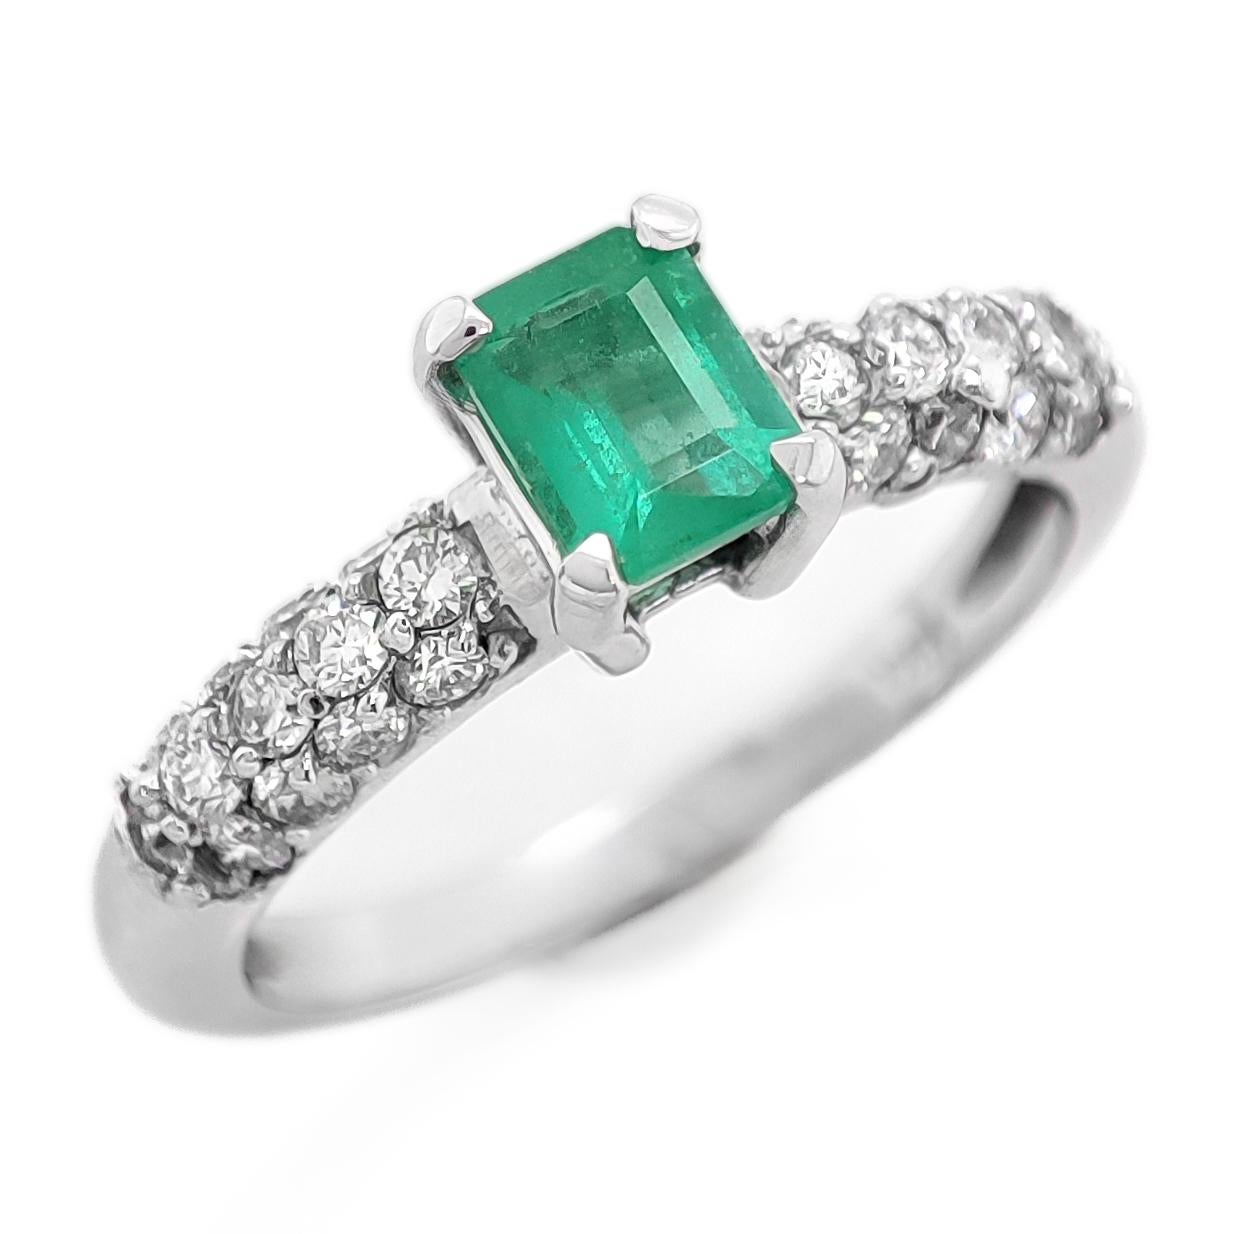 FOR US BUYER NO VAT

This enchanting ring features a 0.47 carat green emerald as its centerpiece, showcasing the lush and vibrant green hue that emeralds are prized for.

The emerald is elegantly complemented by 26 diamonds, totaling 0.40 carats.